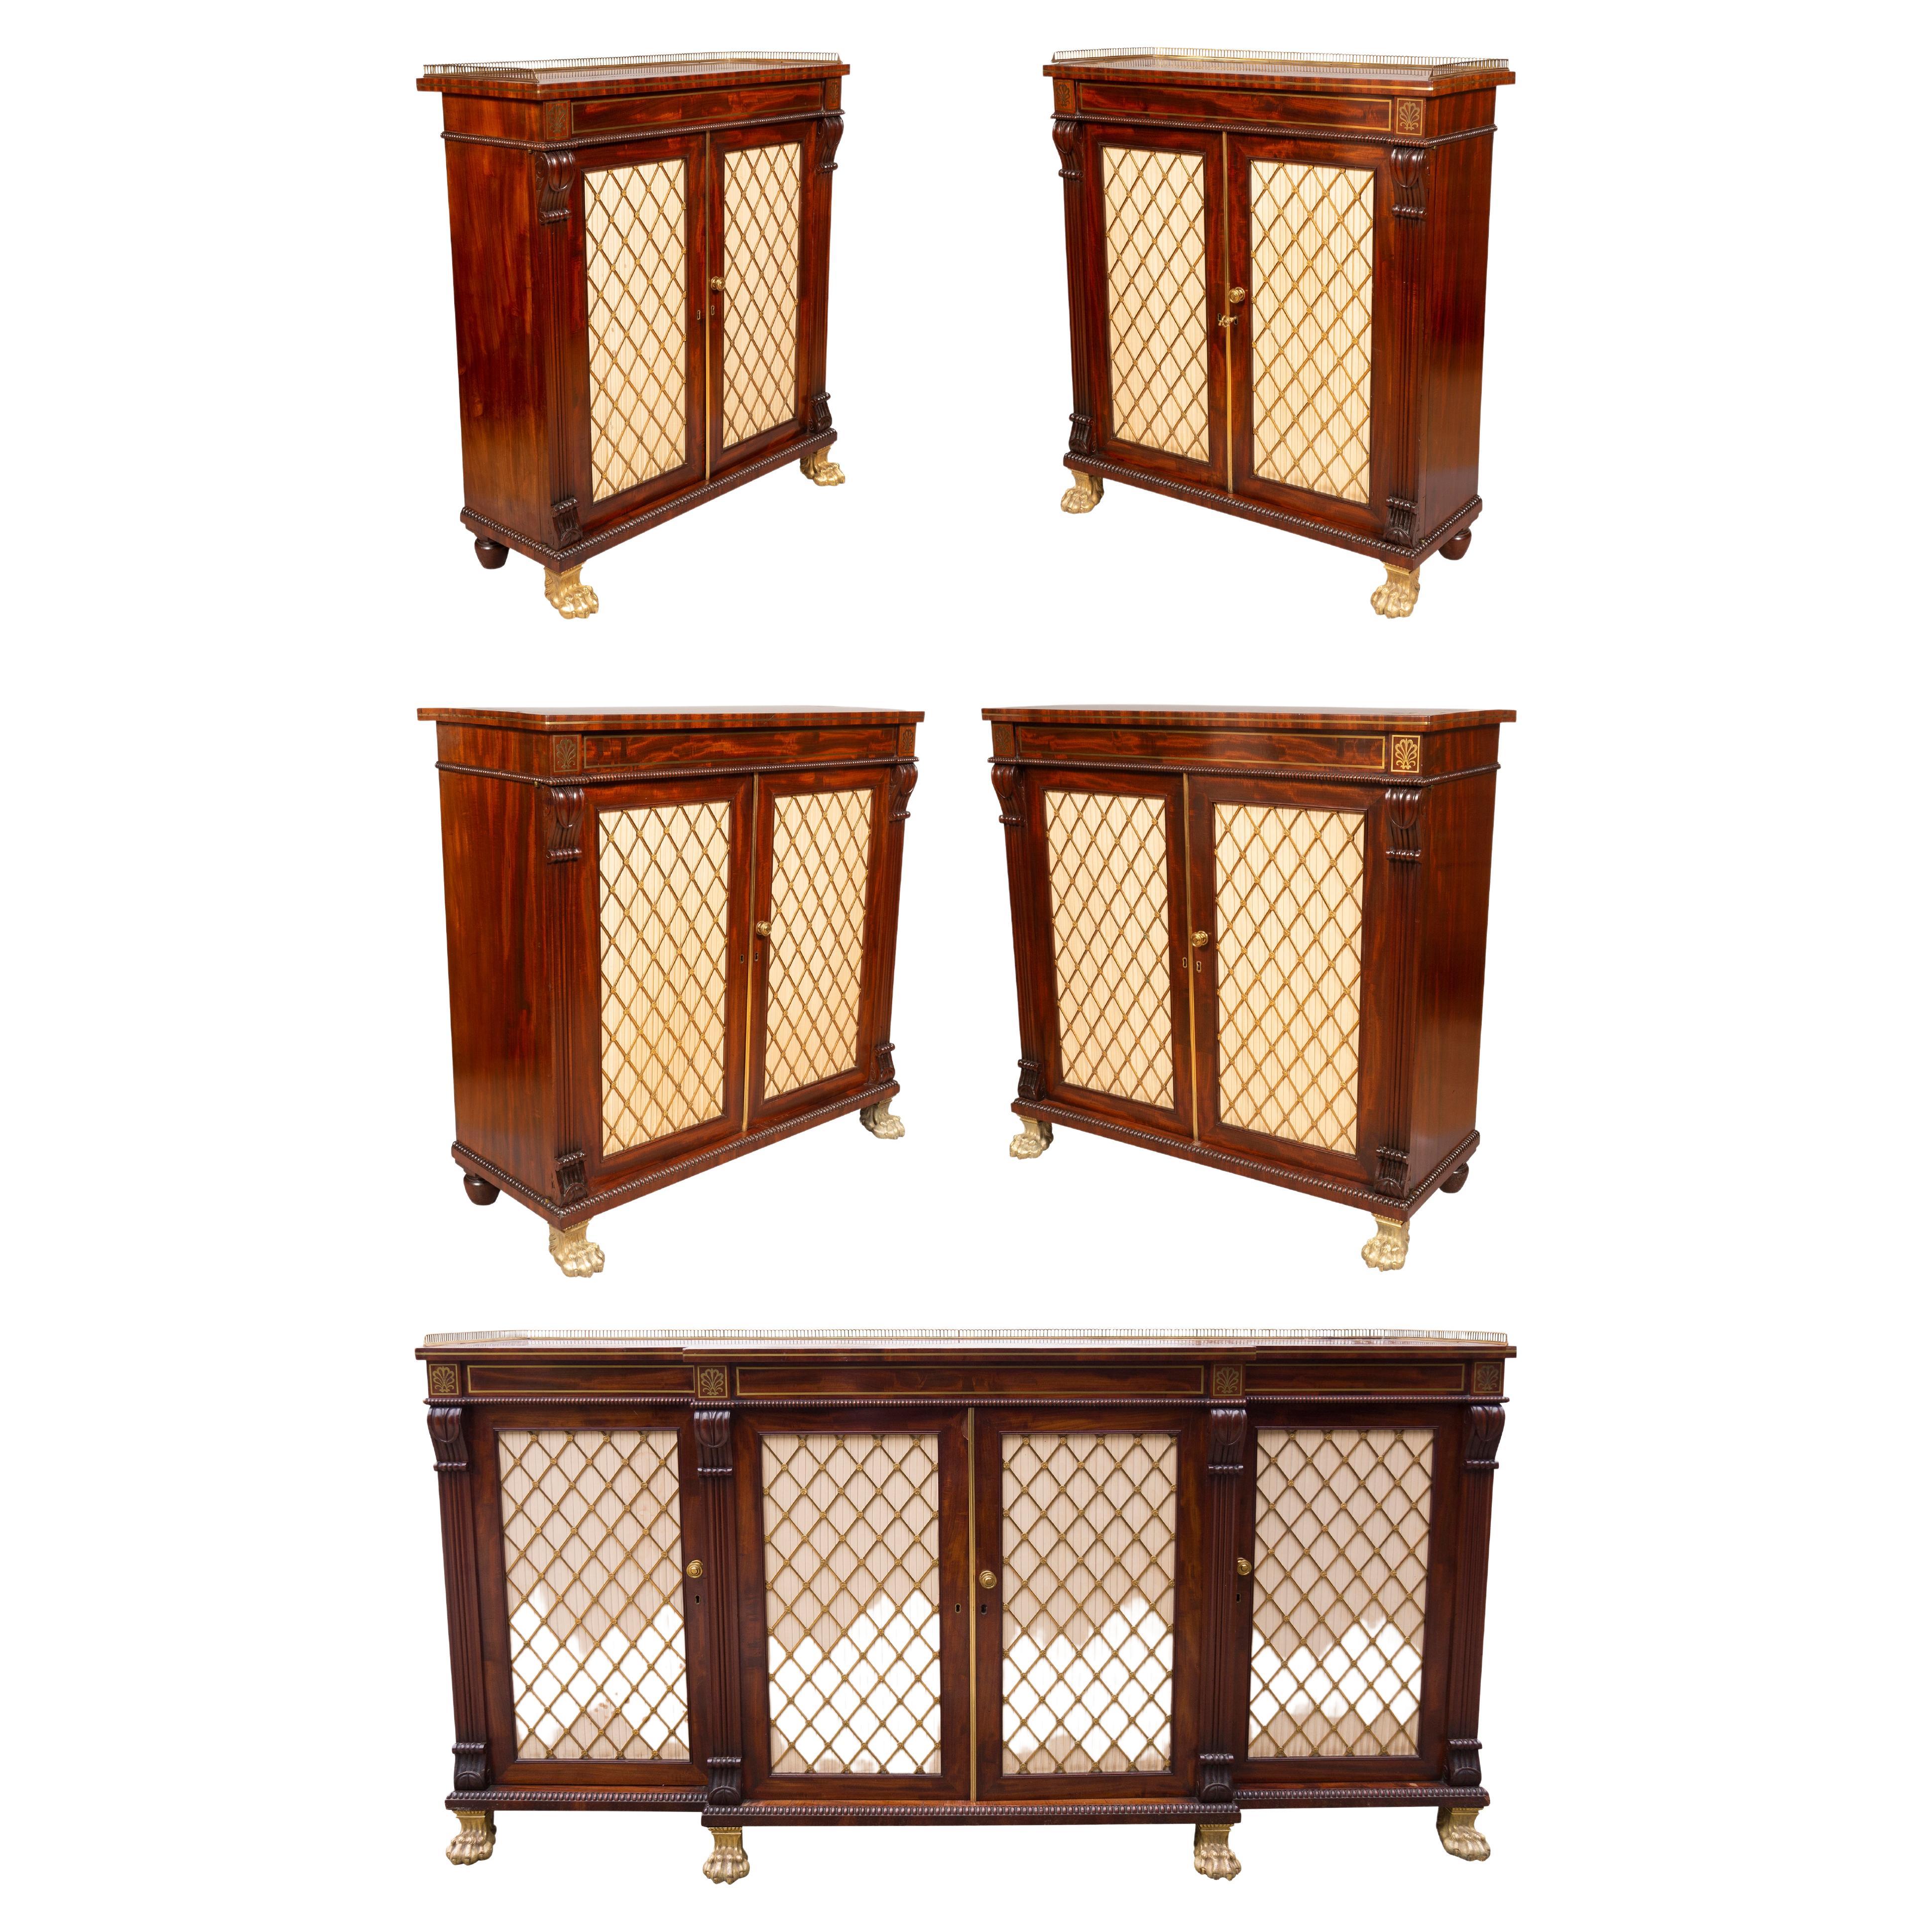 Suite Of Five Regency Brass Inlaid Side Cabinets From Westport House County Mayo